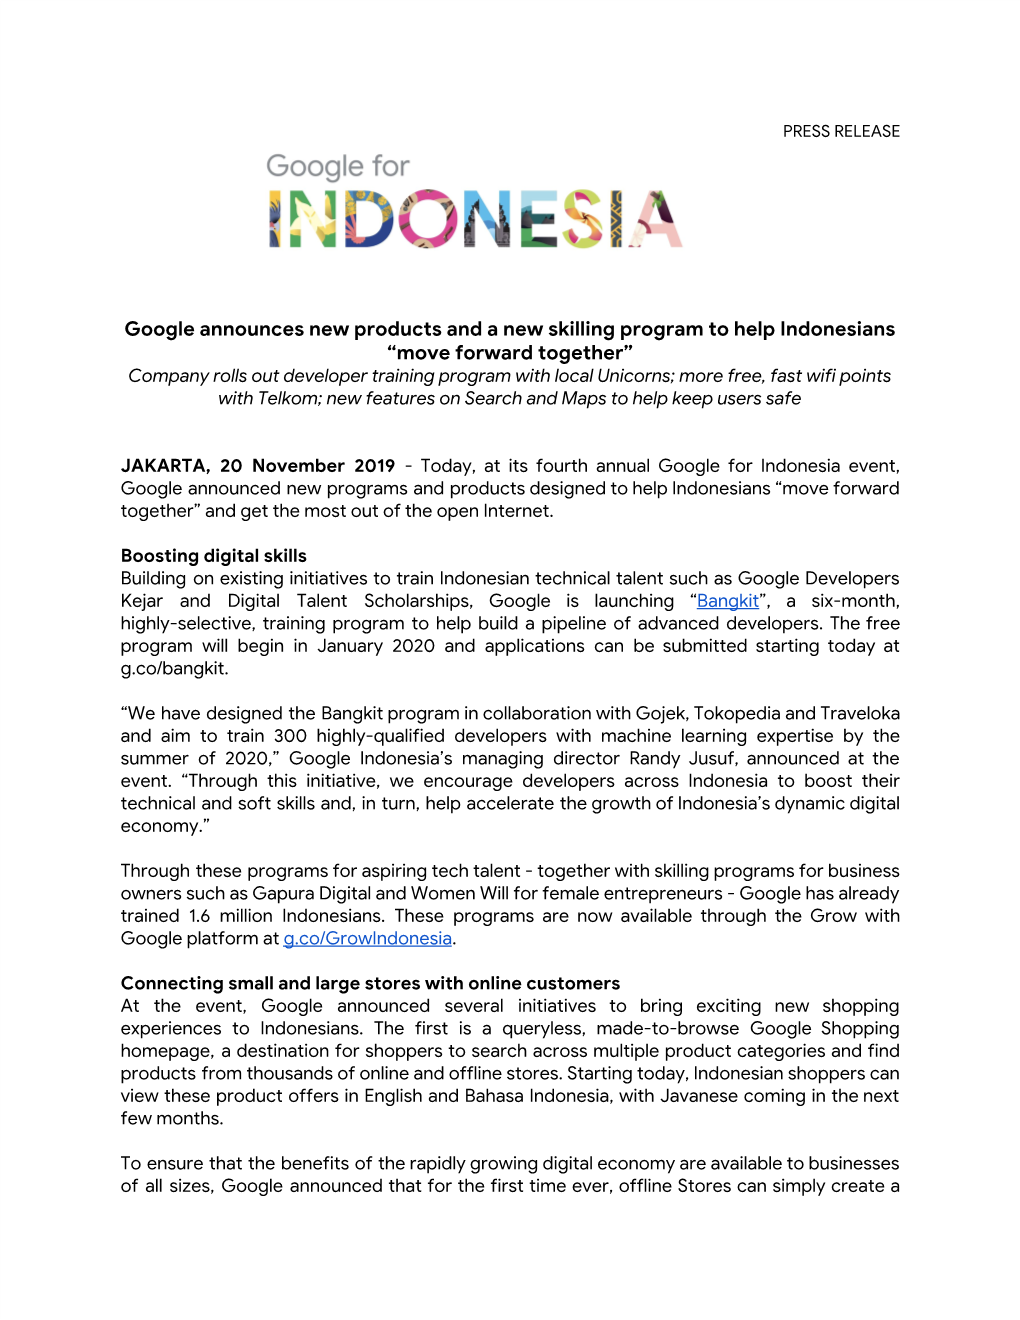 Google Announces New Products and a New Skilling Program to Help Indonesians